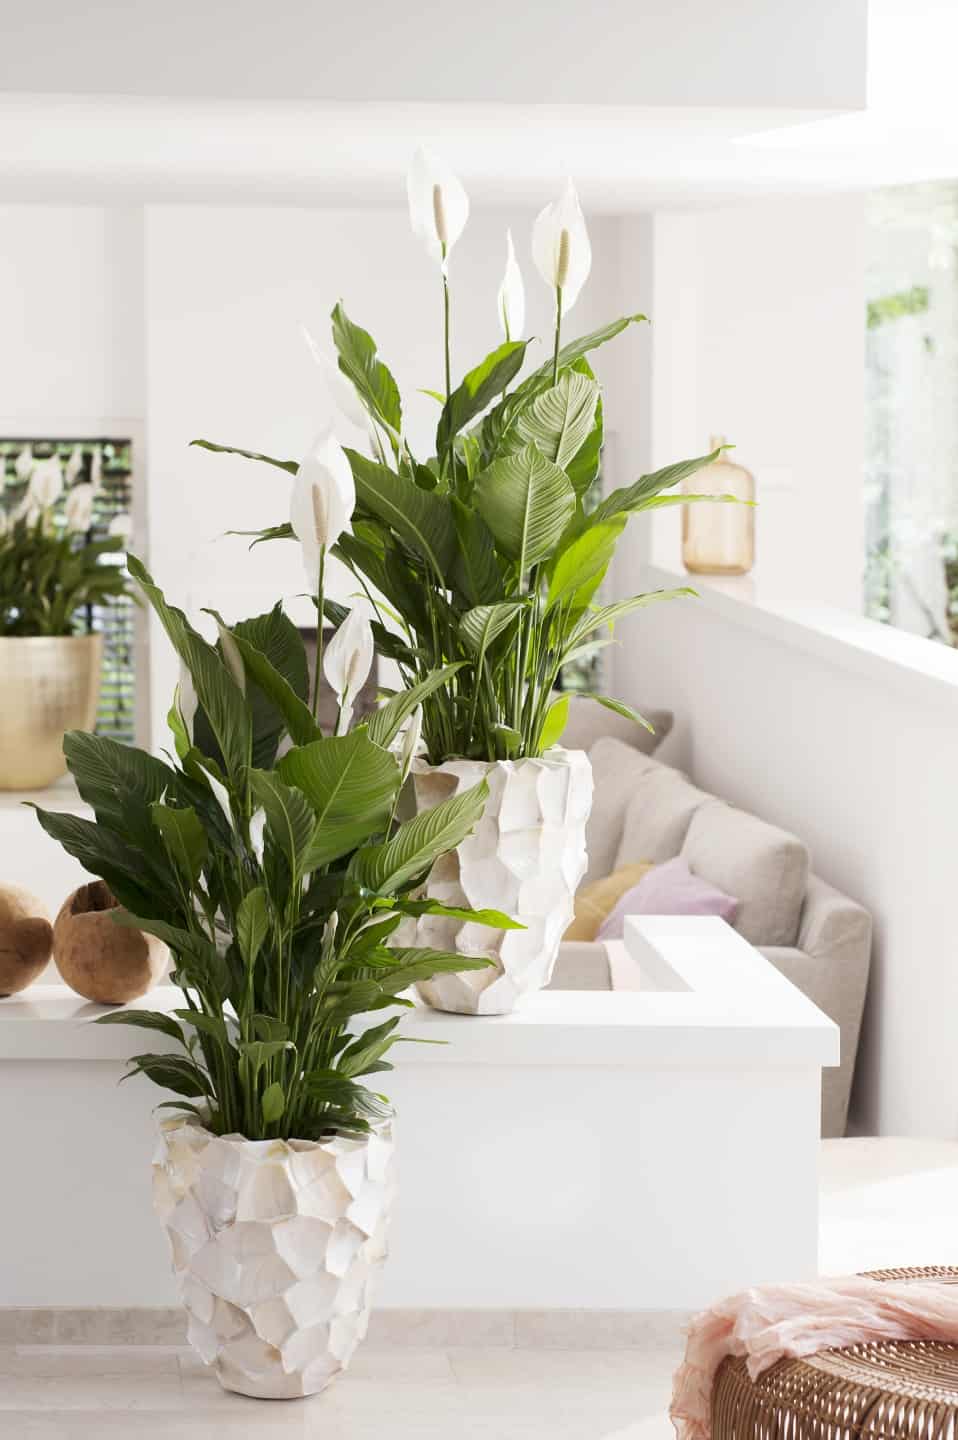 A pair of peace lily plants